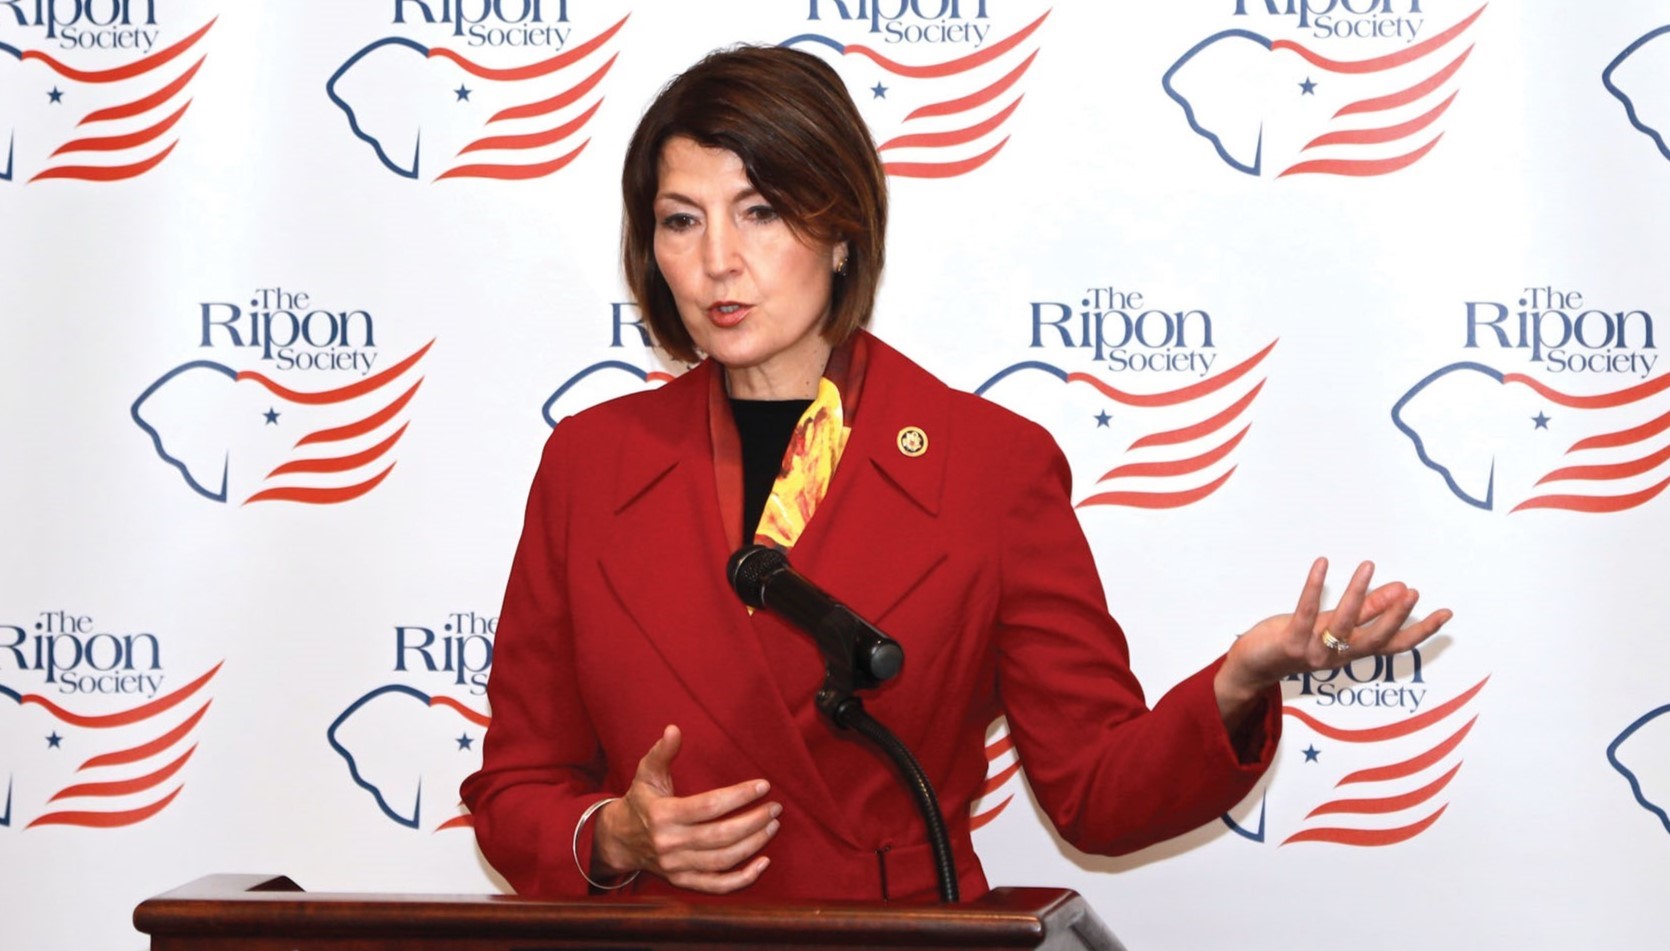 McMorris Rodgers Strikes Upbeat Tone as She Reflects on Her Time in Office and the Challenges That Lie Ahead